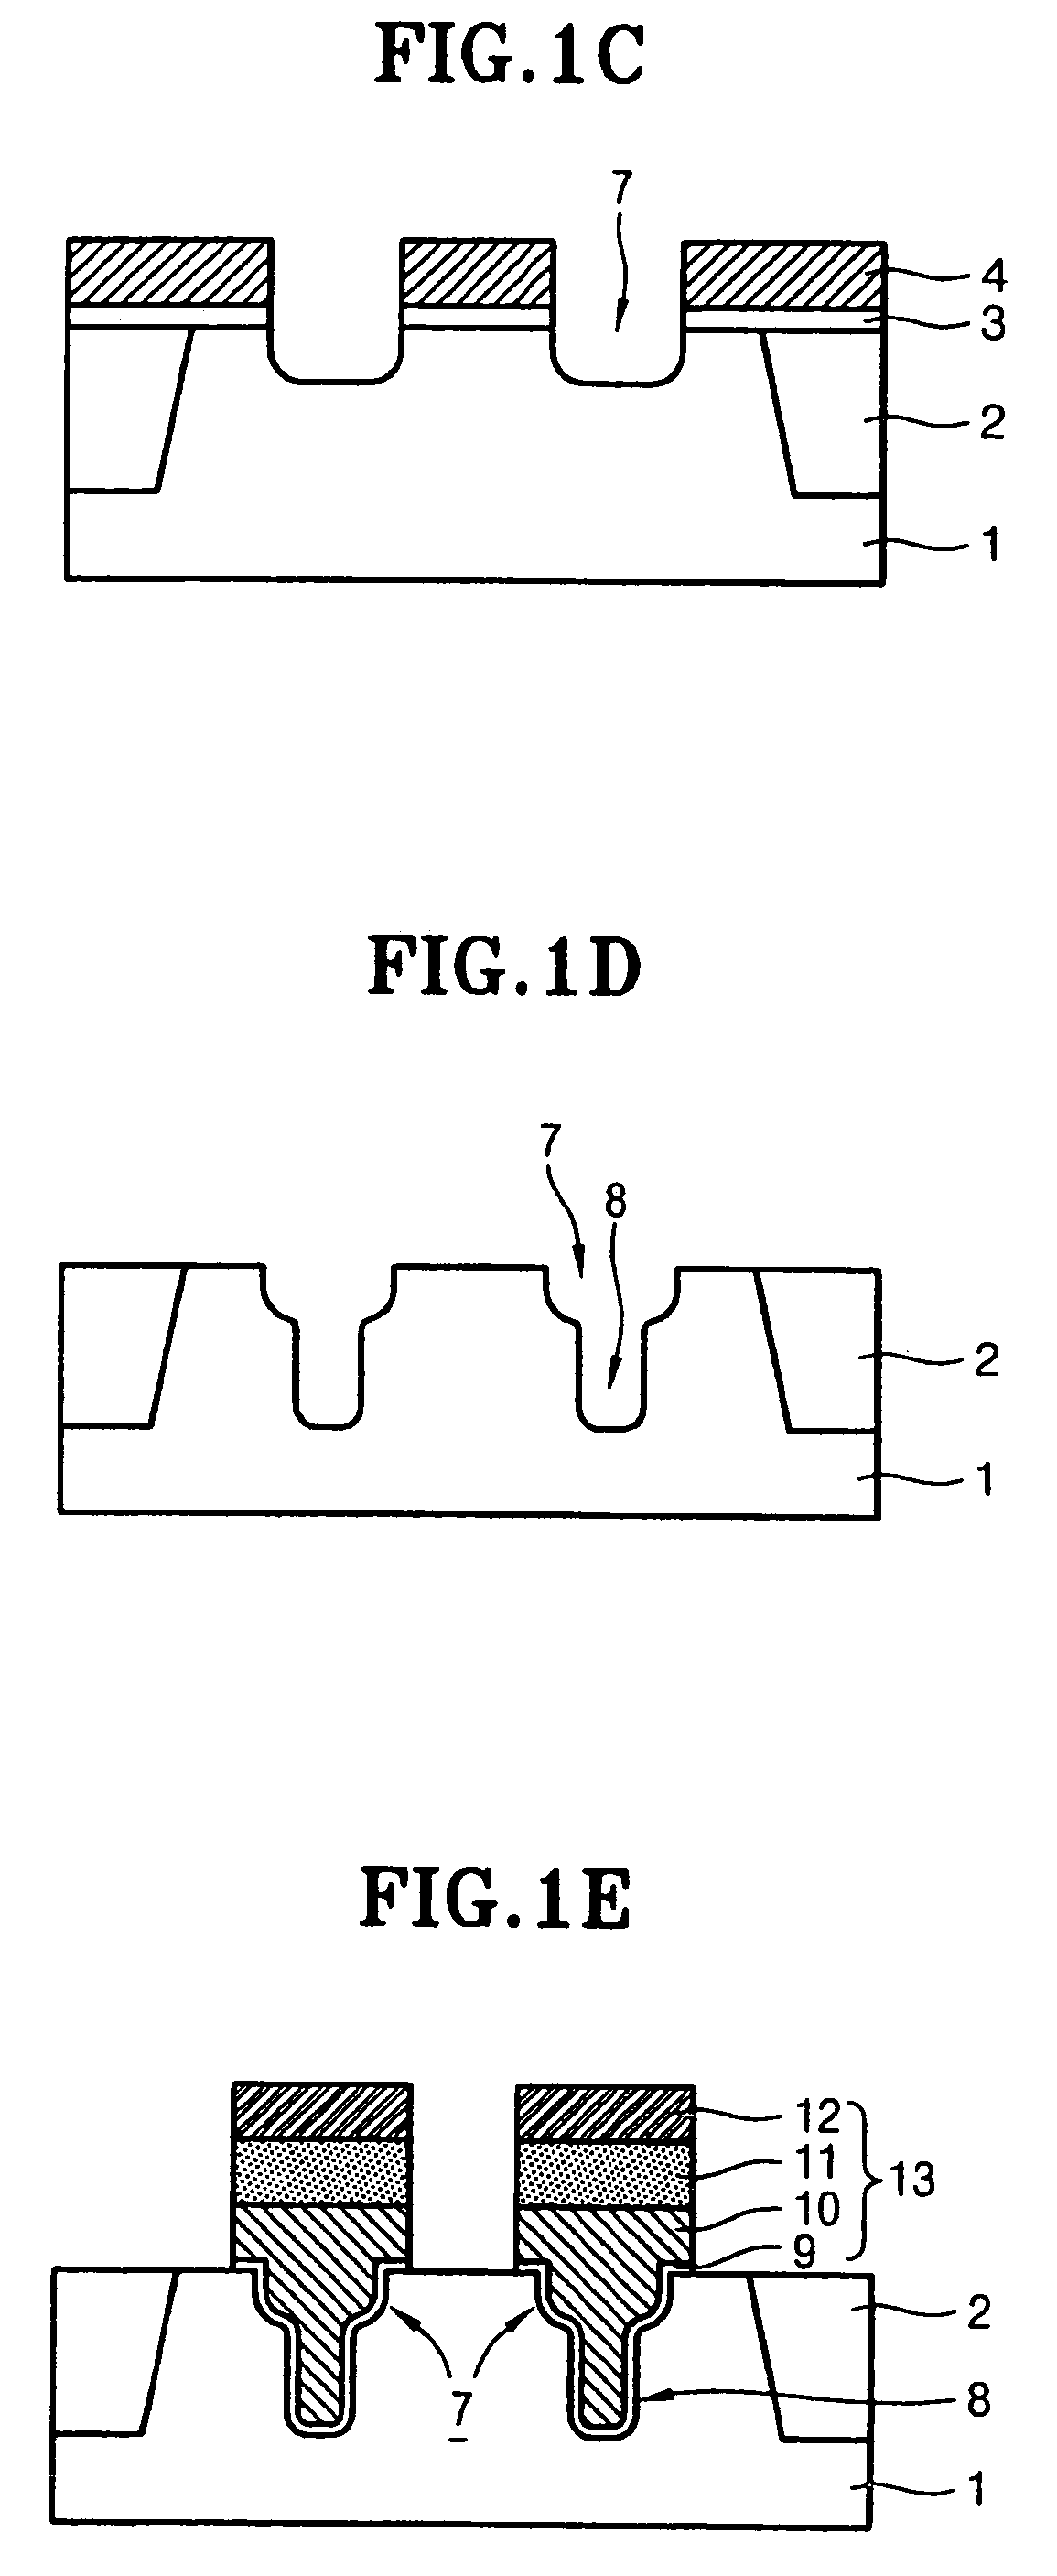 Method of manufacturing semiconductor device having recess gate structure with varying recess width for increased channel length